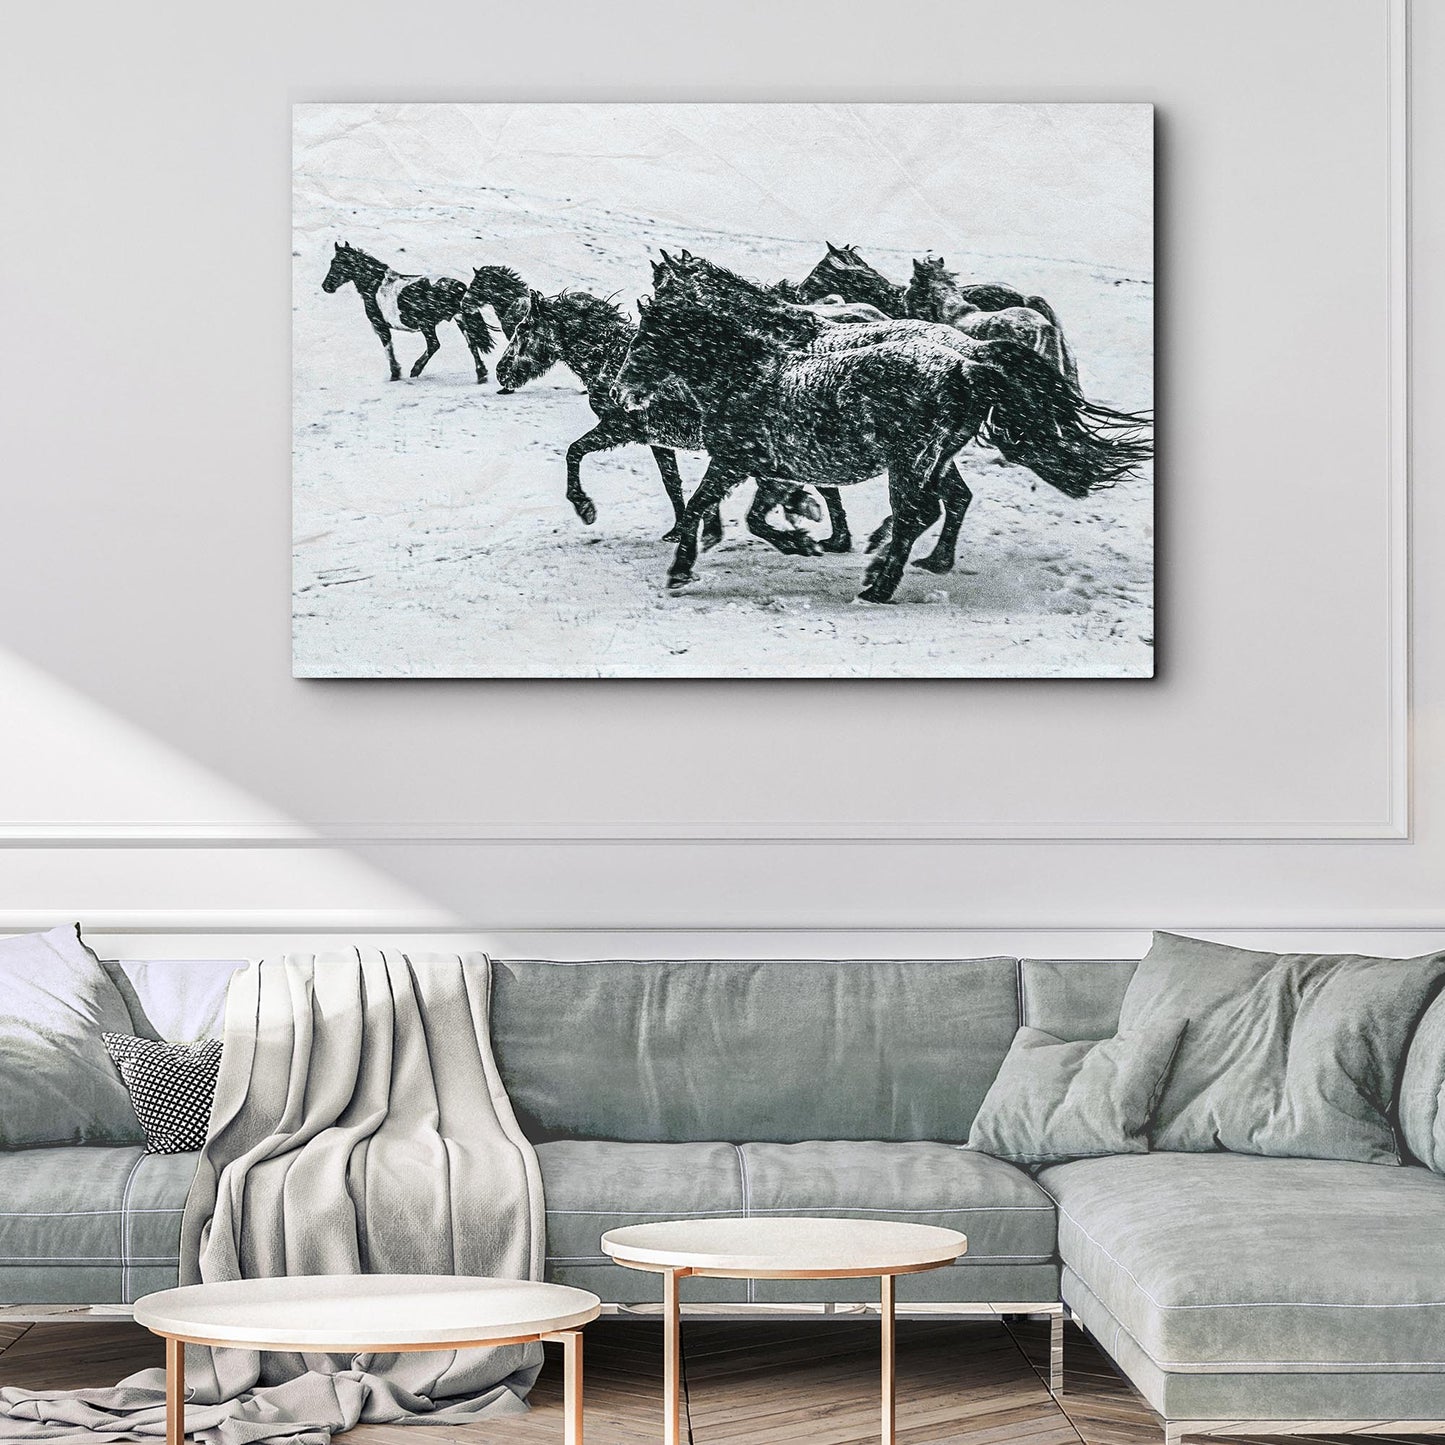 Horses In Snow Canvas Wall Art Style 2 - Image by Tailored Canvases